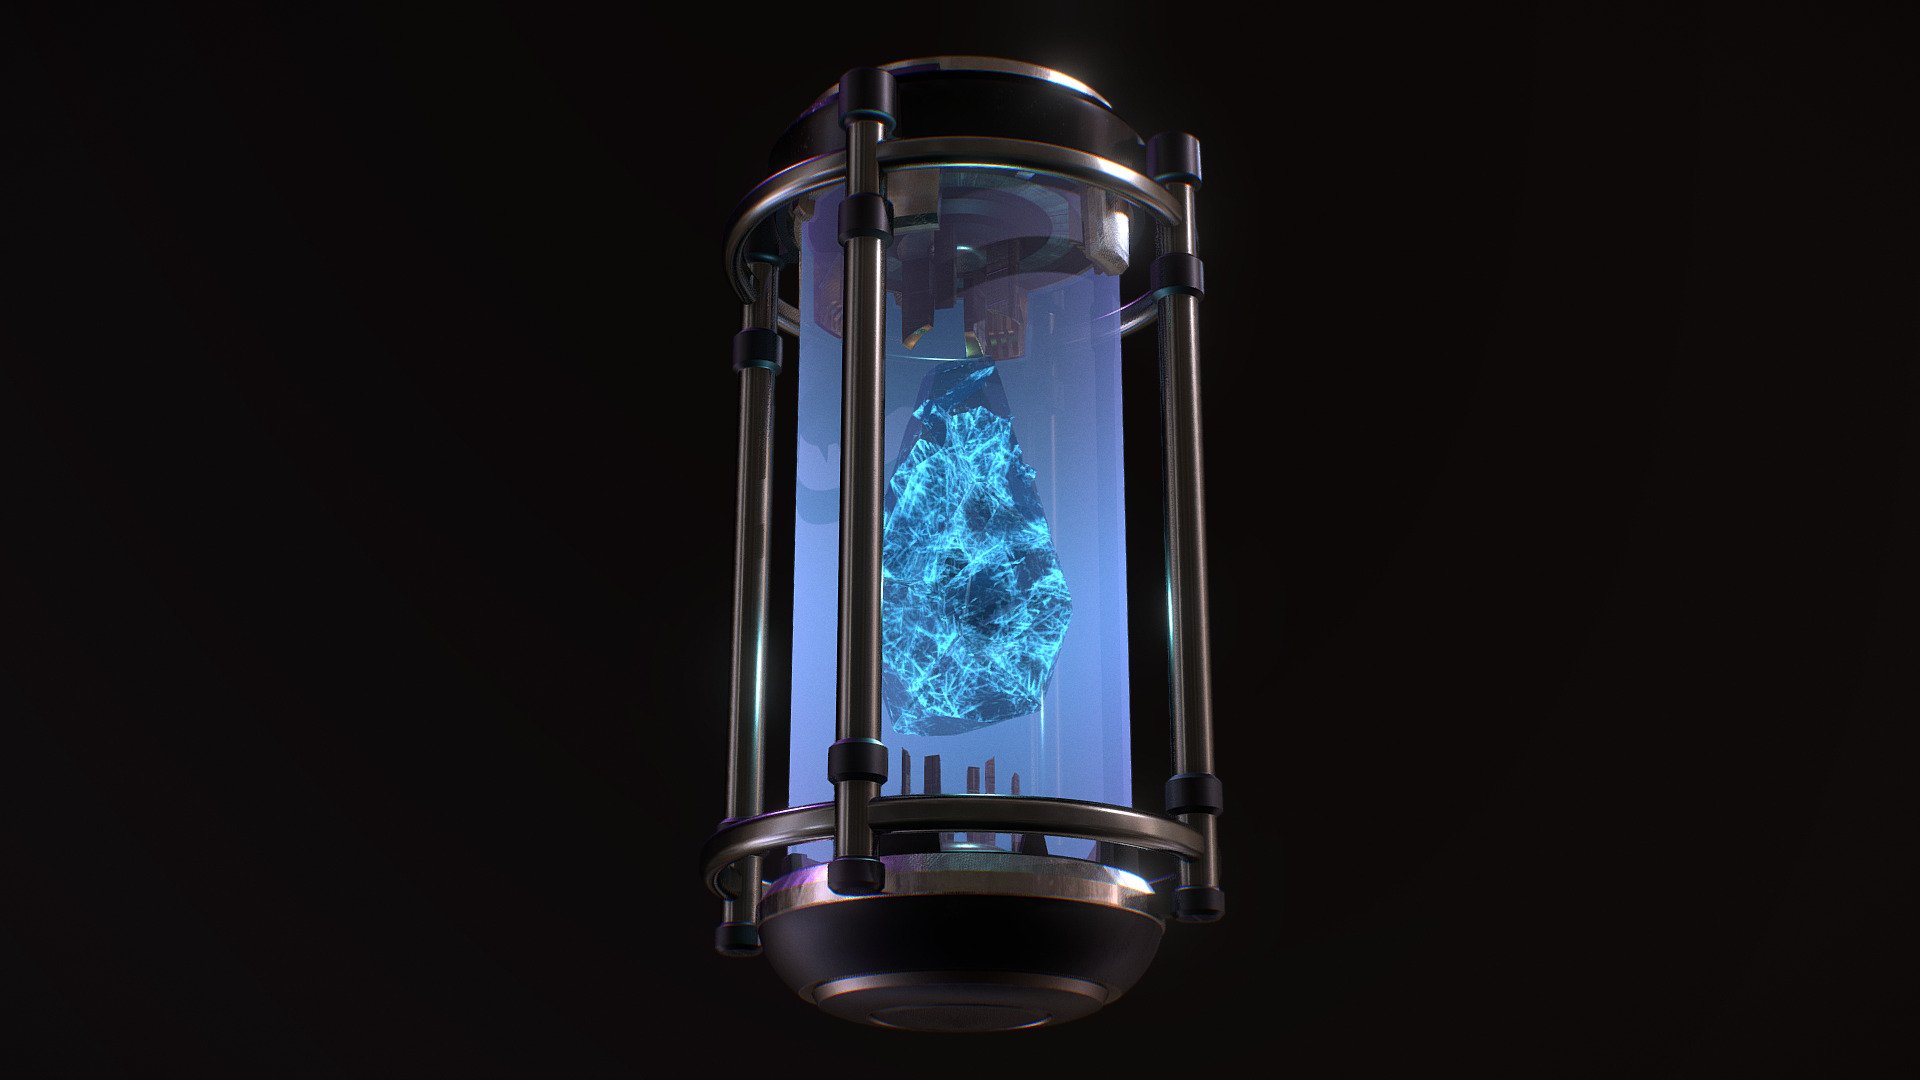 Finishing all my left over project , this one was originaly from Astral Research project.
A Space odyssey we never finished with a friend.

For any information , contacte me on discord at Sirolalo#2510 - Crystal Capsule - Download Free 3D model by Sirolalo 3d model